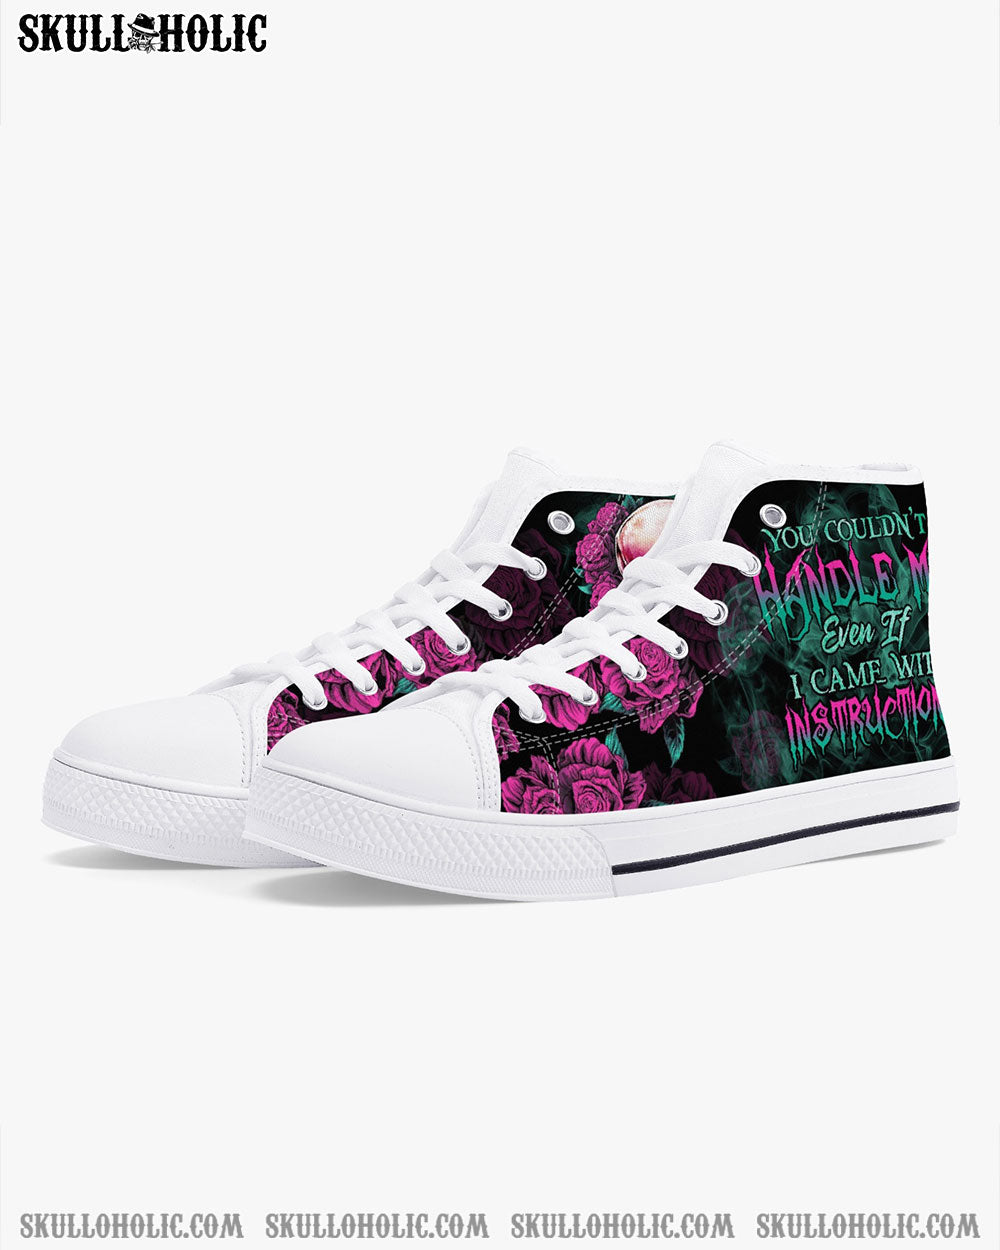 YOU COULDN'T HANDLE ME SKULL G HIGH TOP CANVAS SHOES - TLTR1412222